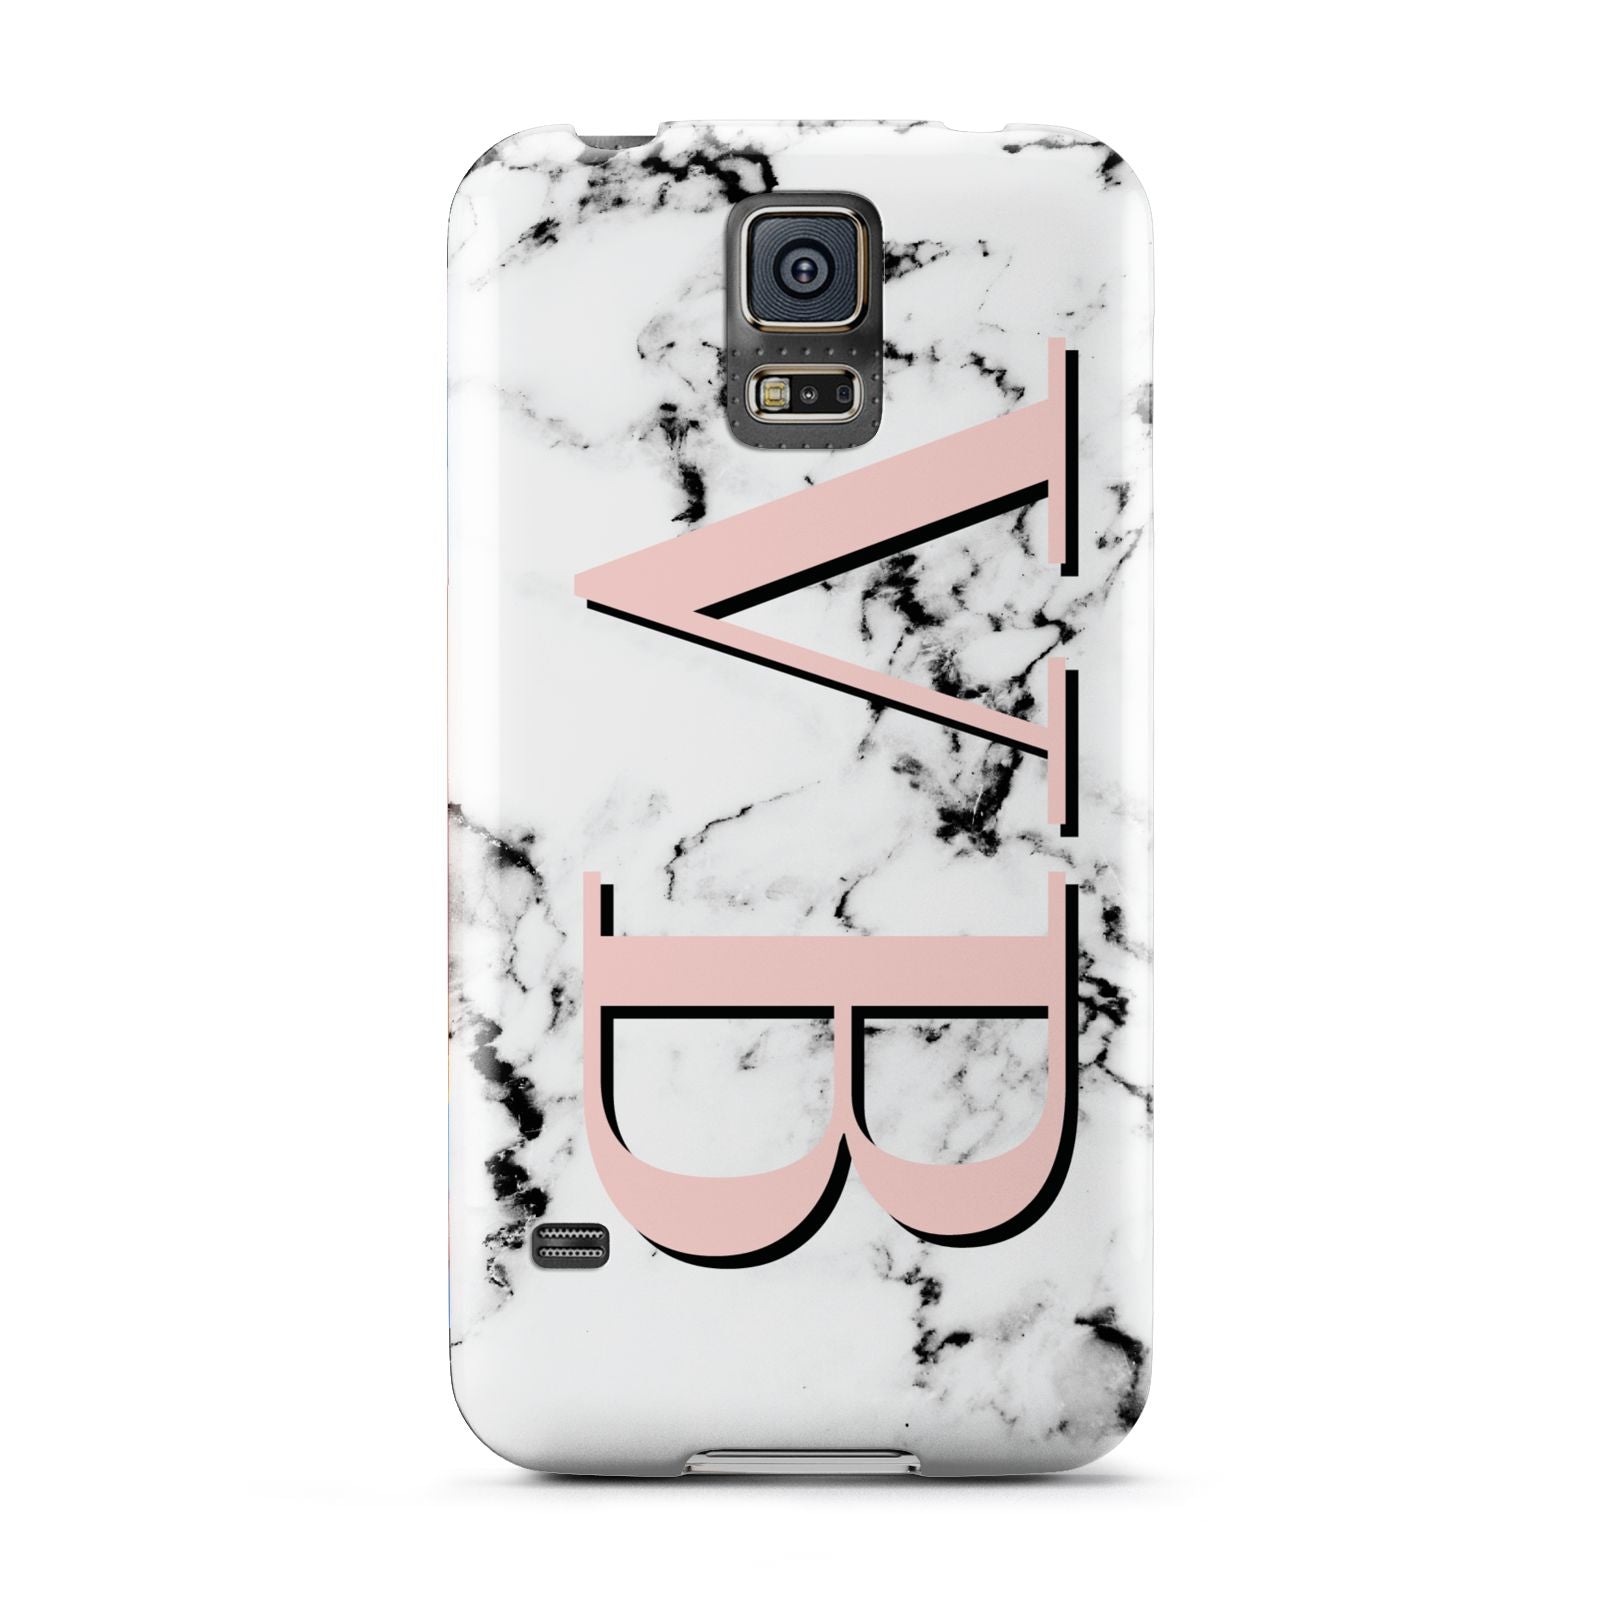 Personalised Coral Malble Initials Samsung Galaxy S5 Case